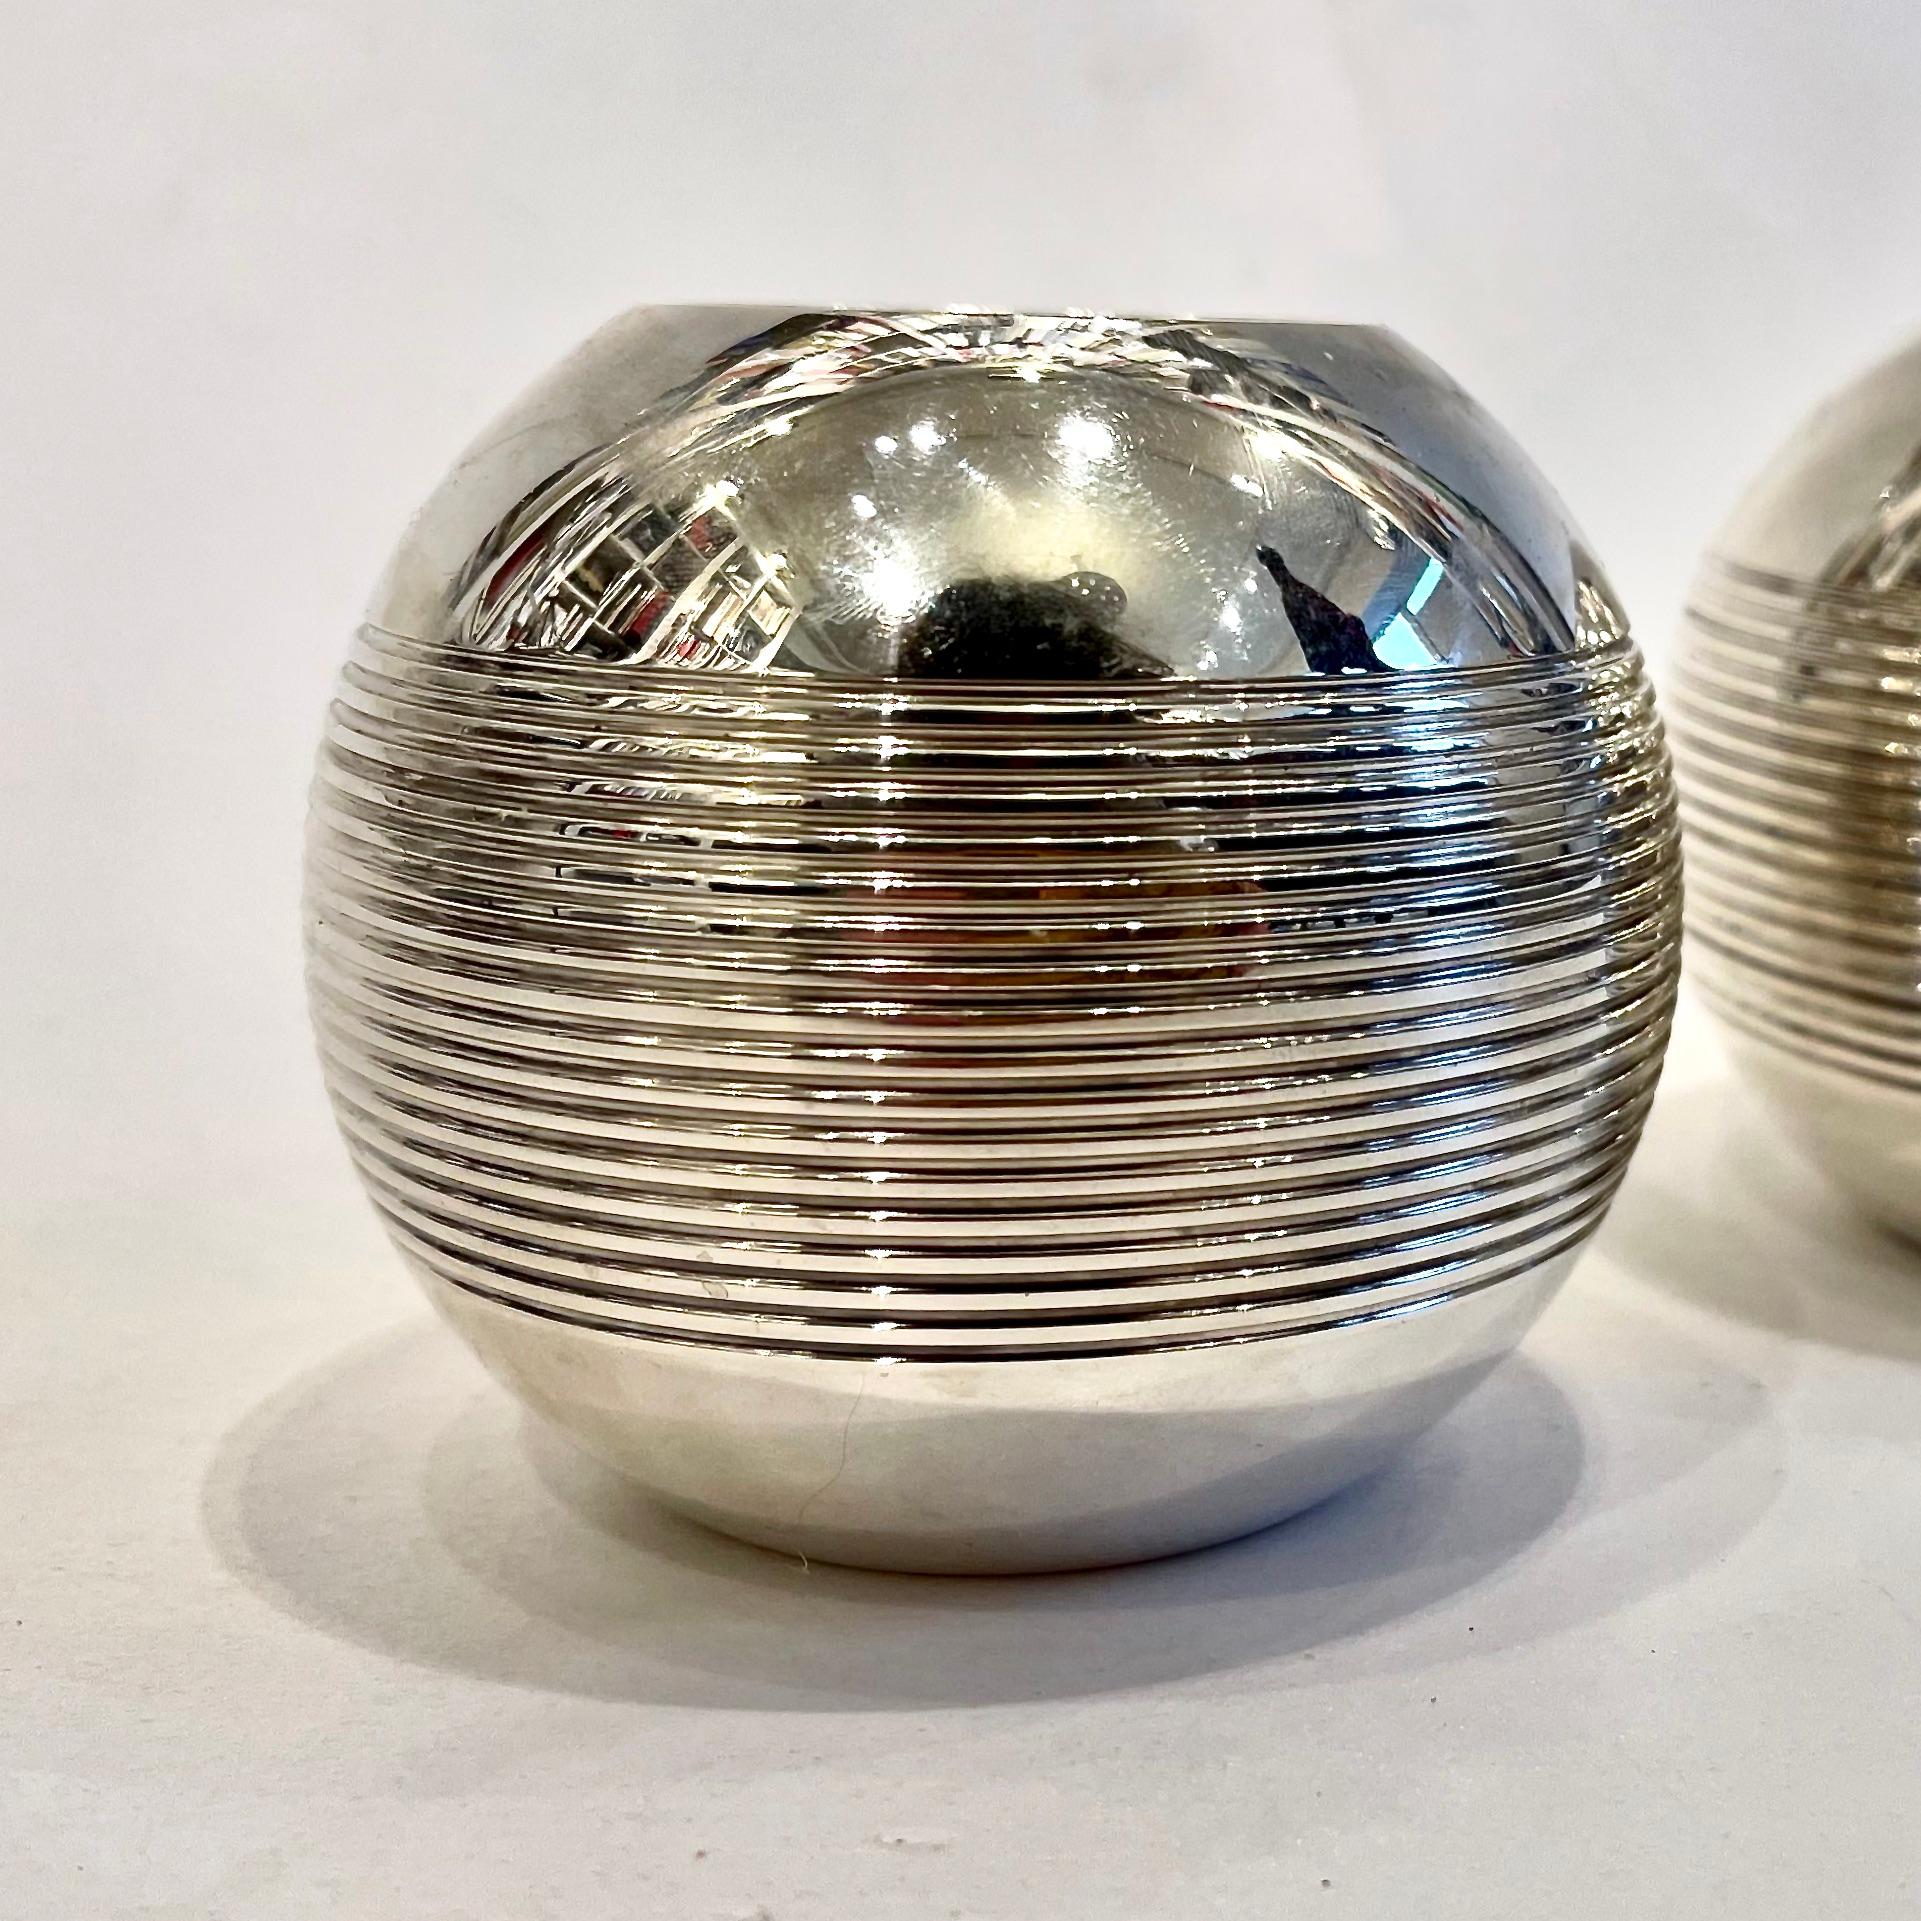 This pair of rounded silver plated candle holders recalls the steel balls used in Pétanque, the traditional game that has delighted Provence natives for centuries. 
Such is the case for these spherical vases, fashioned in mirror-polished